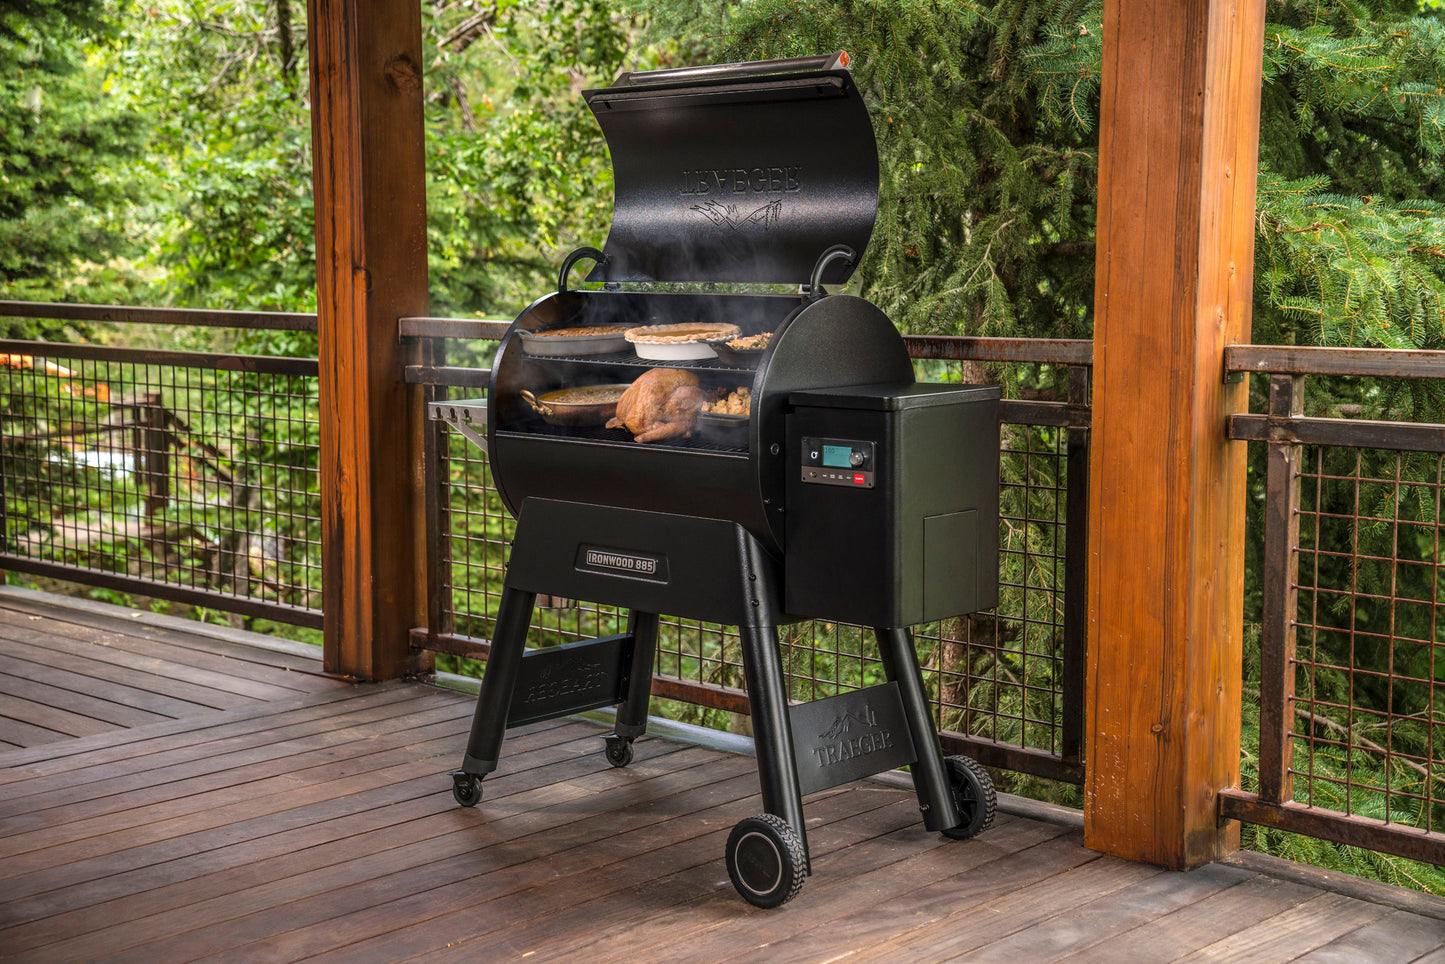 Larger model Traeger smokers/grills can hold an entire turkey, plus your Thanksgiving Day sides and pies, as show on the Ironwood 885.